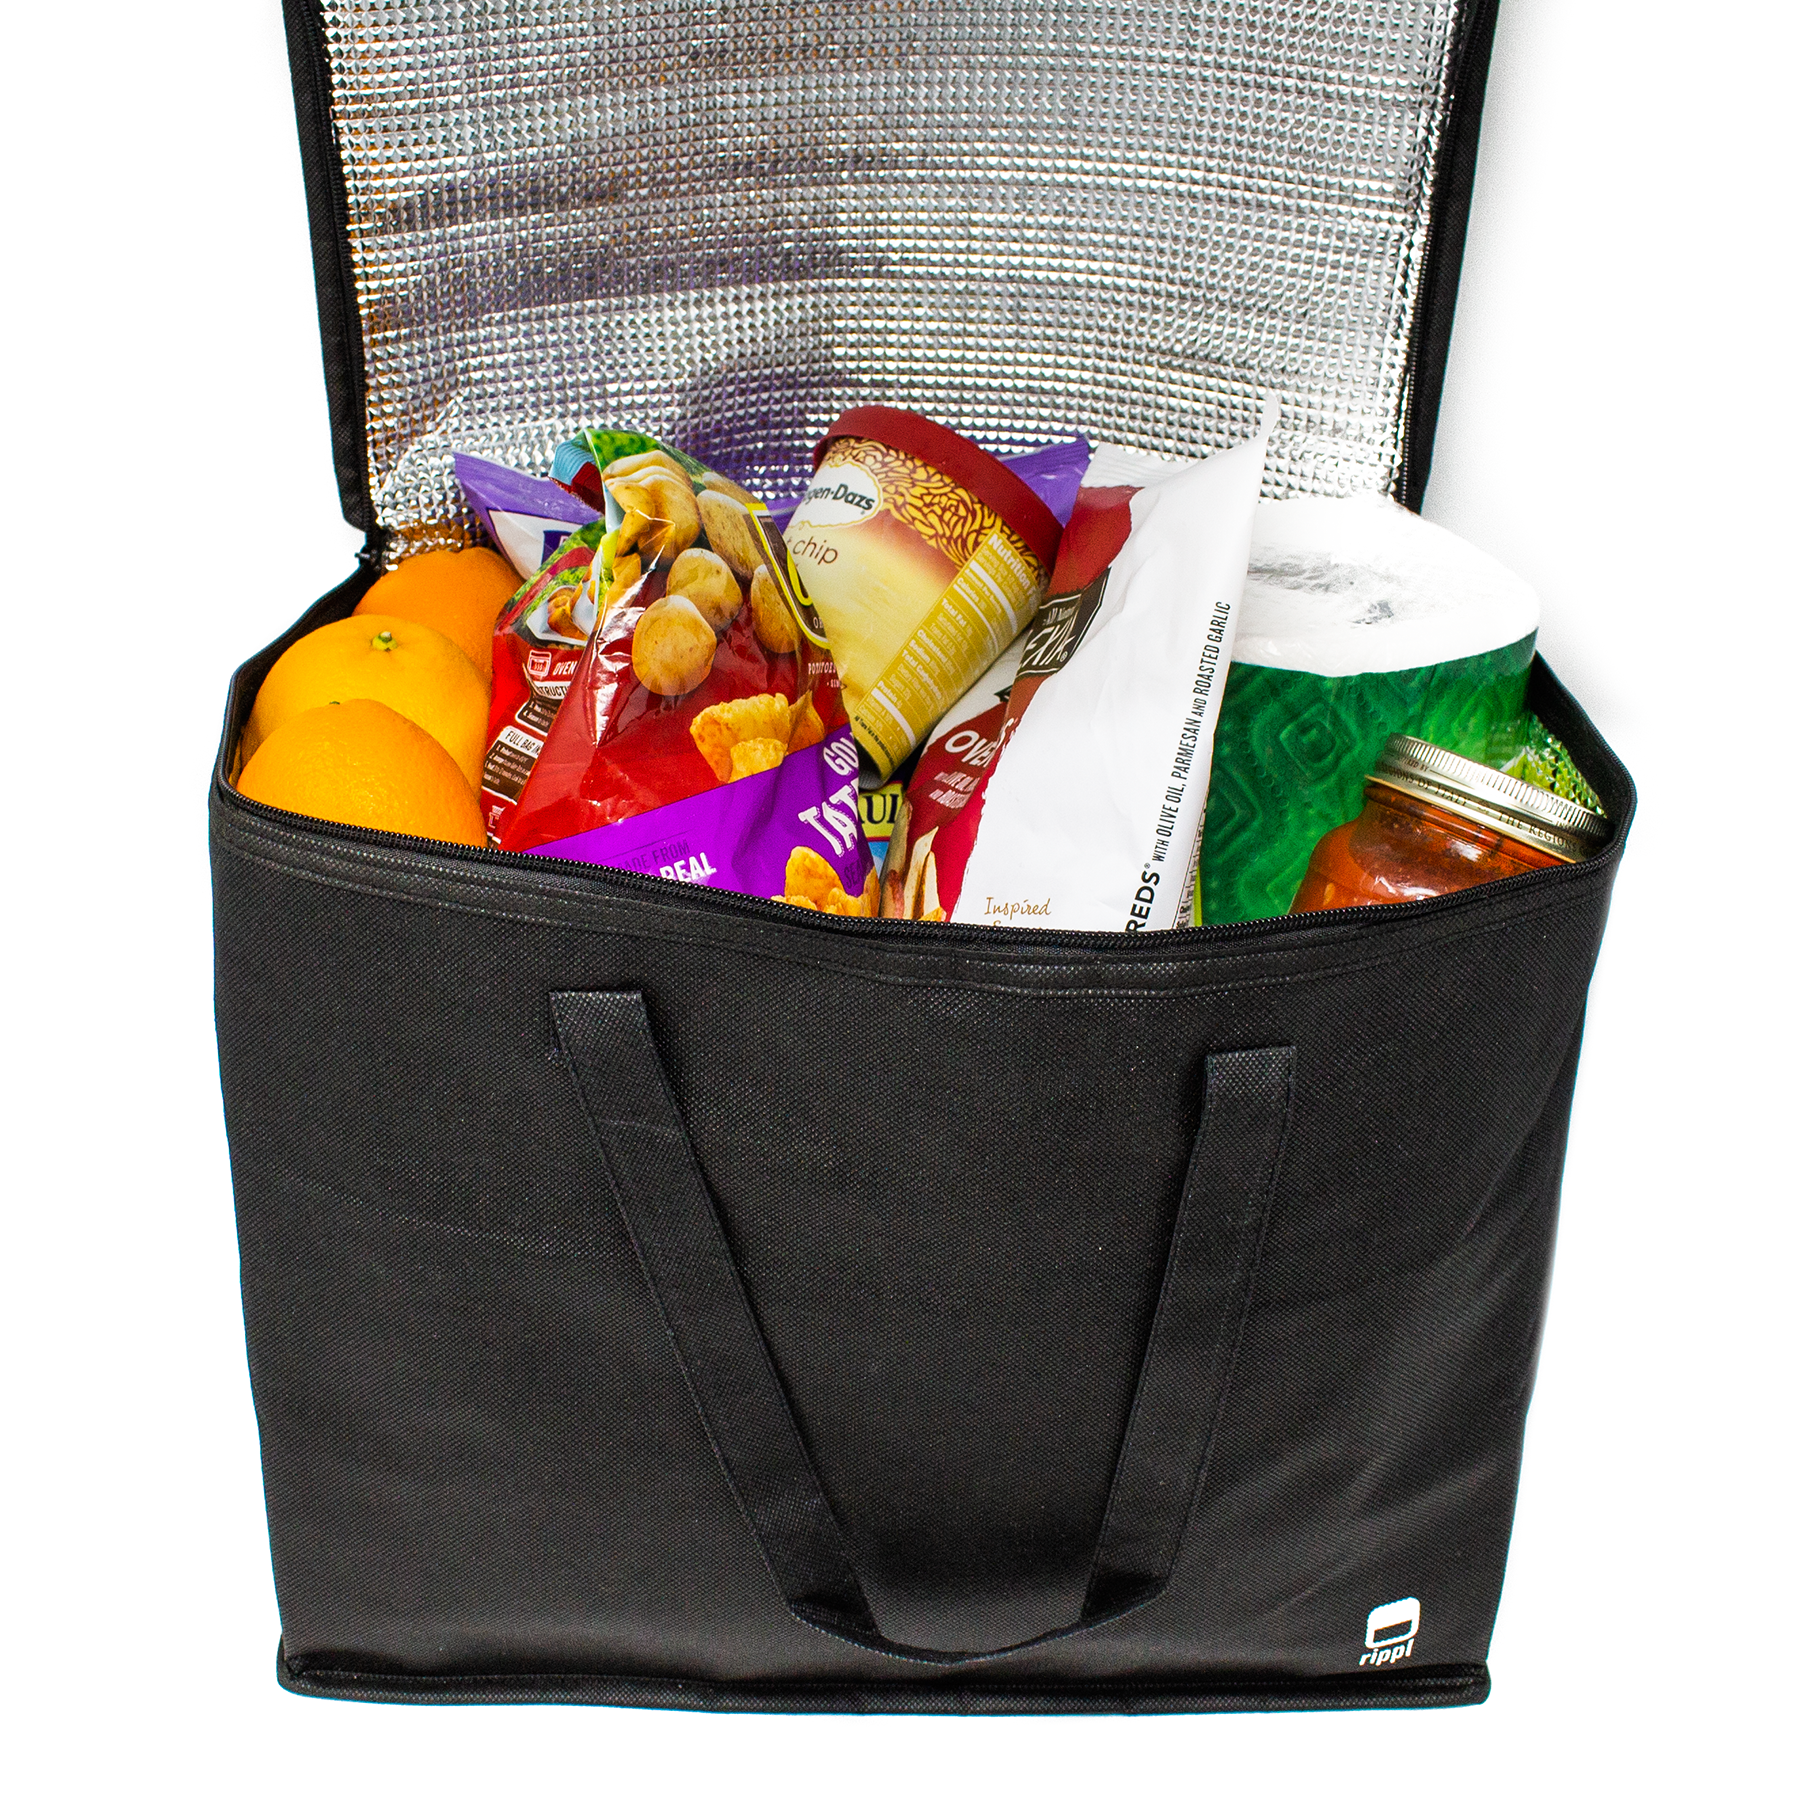 Rippl Insulated Grocery Bags with Zipper Top